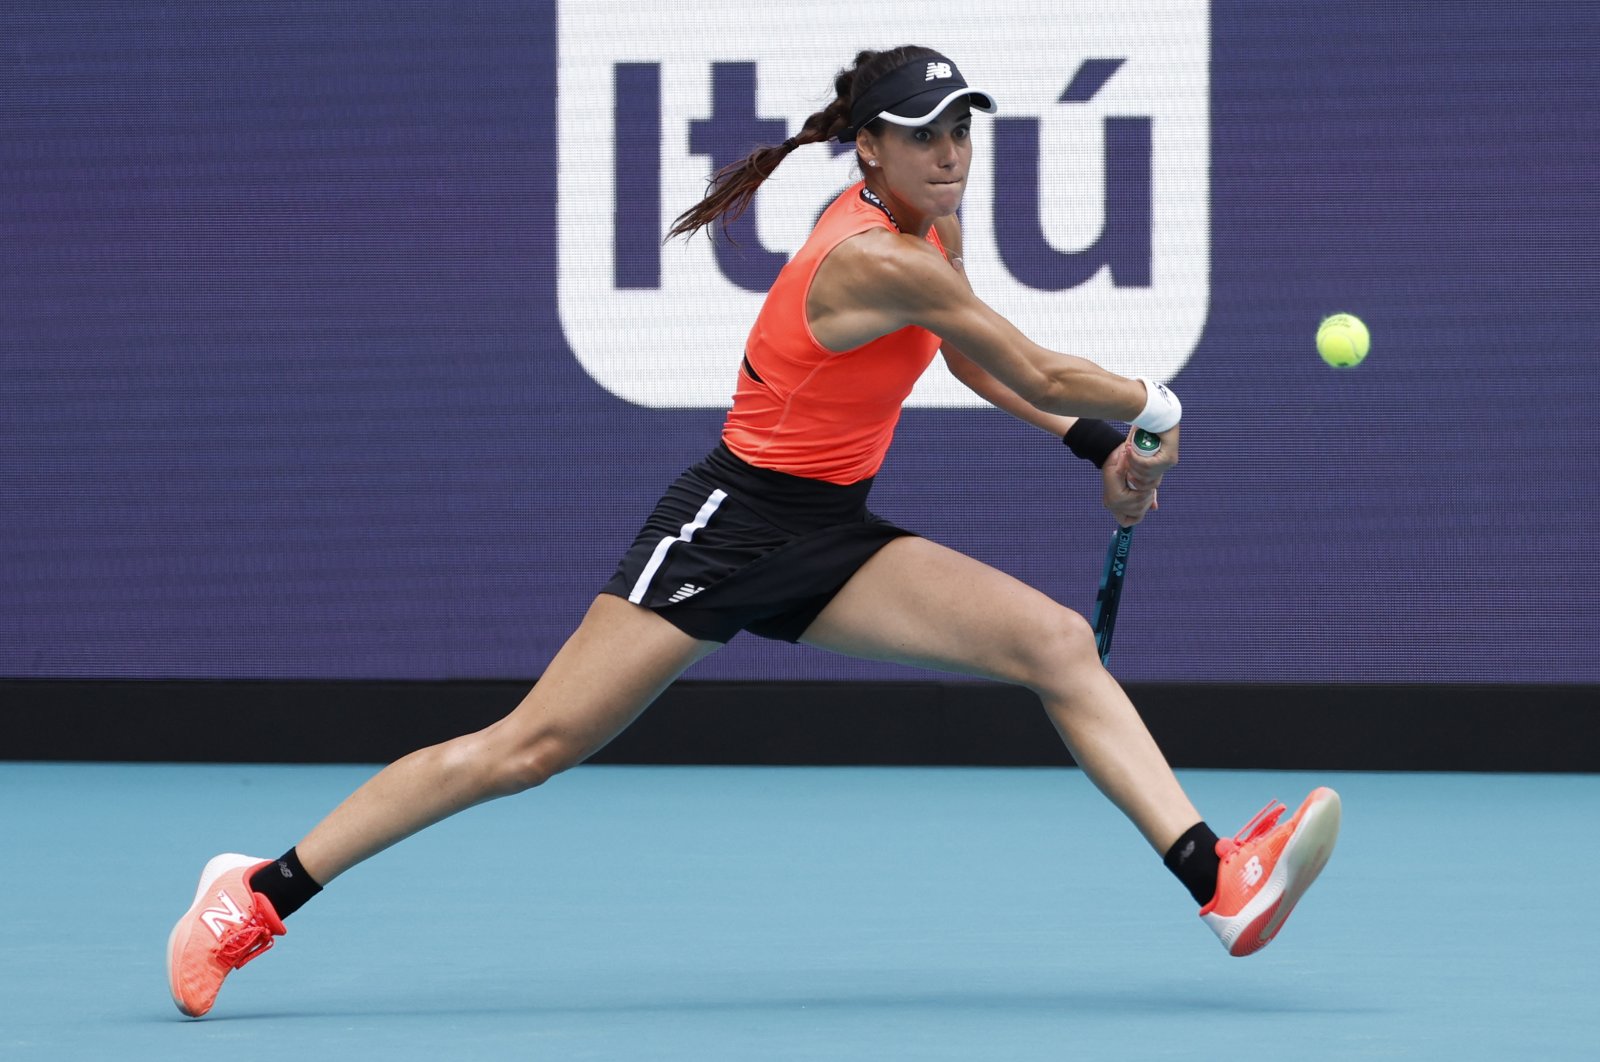 Romania&#039;s Sorana Cirstea hits a backhand against Aryna Sabalenka (not pictured) in a women&#039;s singles quarterfinal on day ten of the Miami Open at Hard Rock Stadium, Miami, US., March 29, 2023. (Reuters Photo)